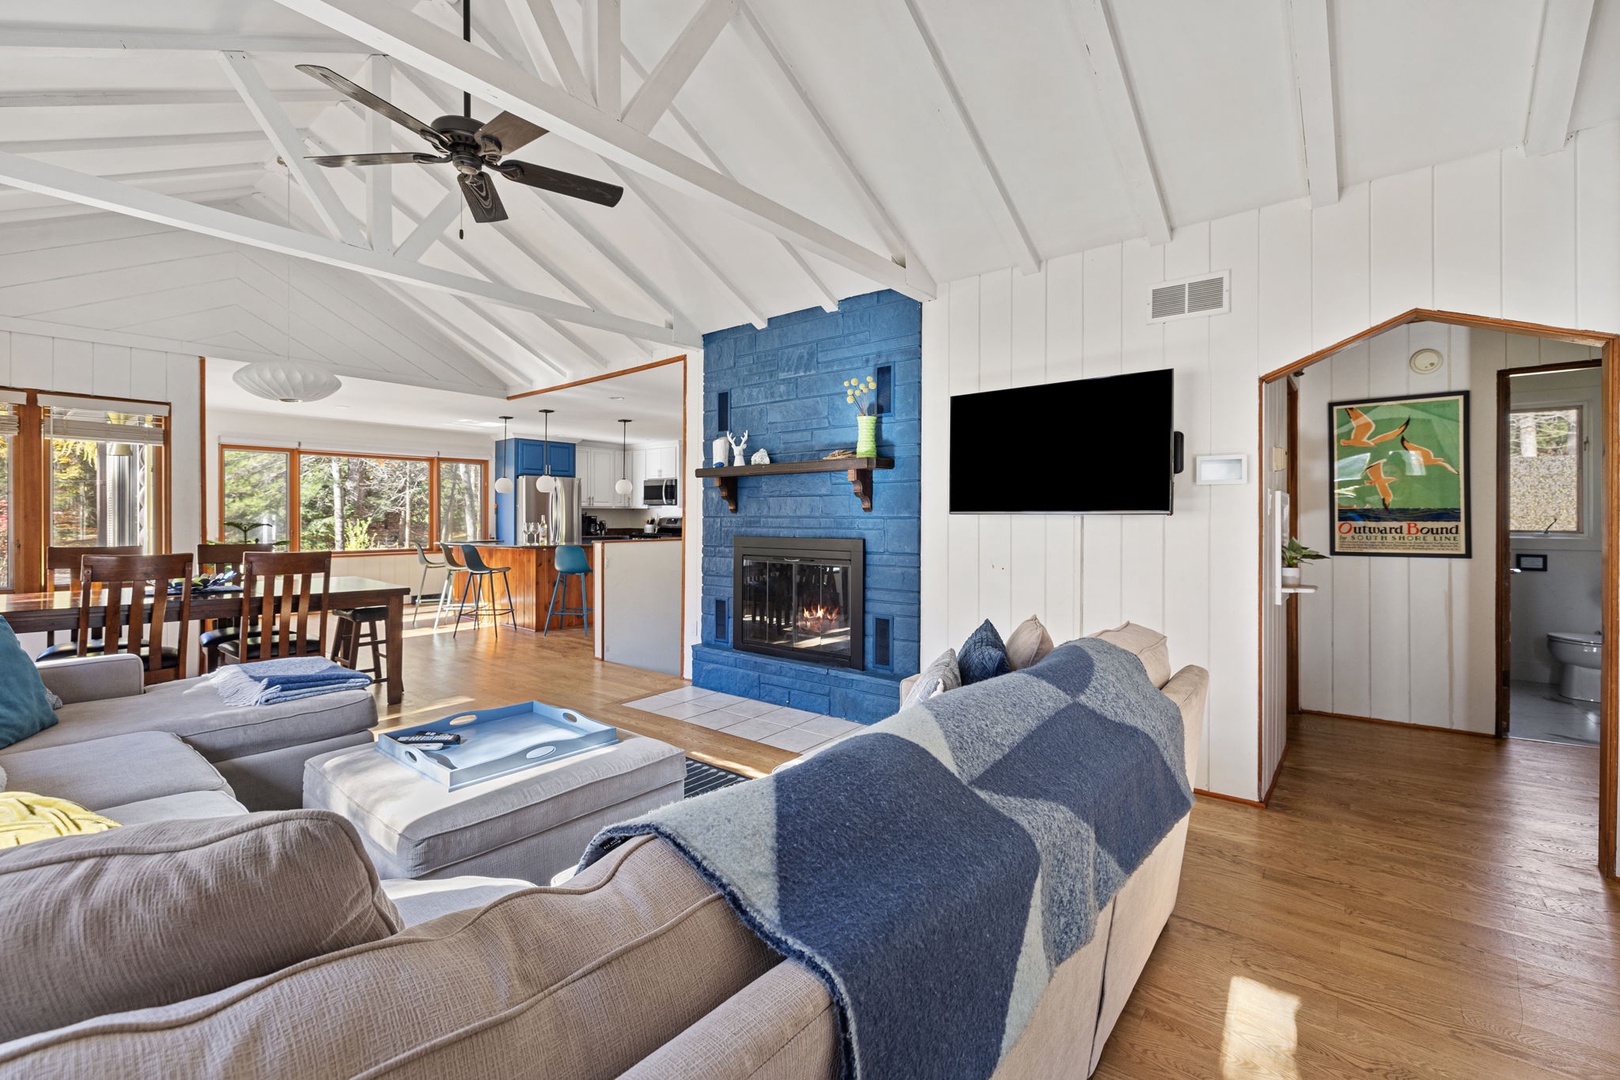 Wade's Cabin's open design, great natural light and rich styling make for a WOW!